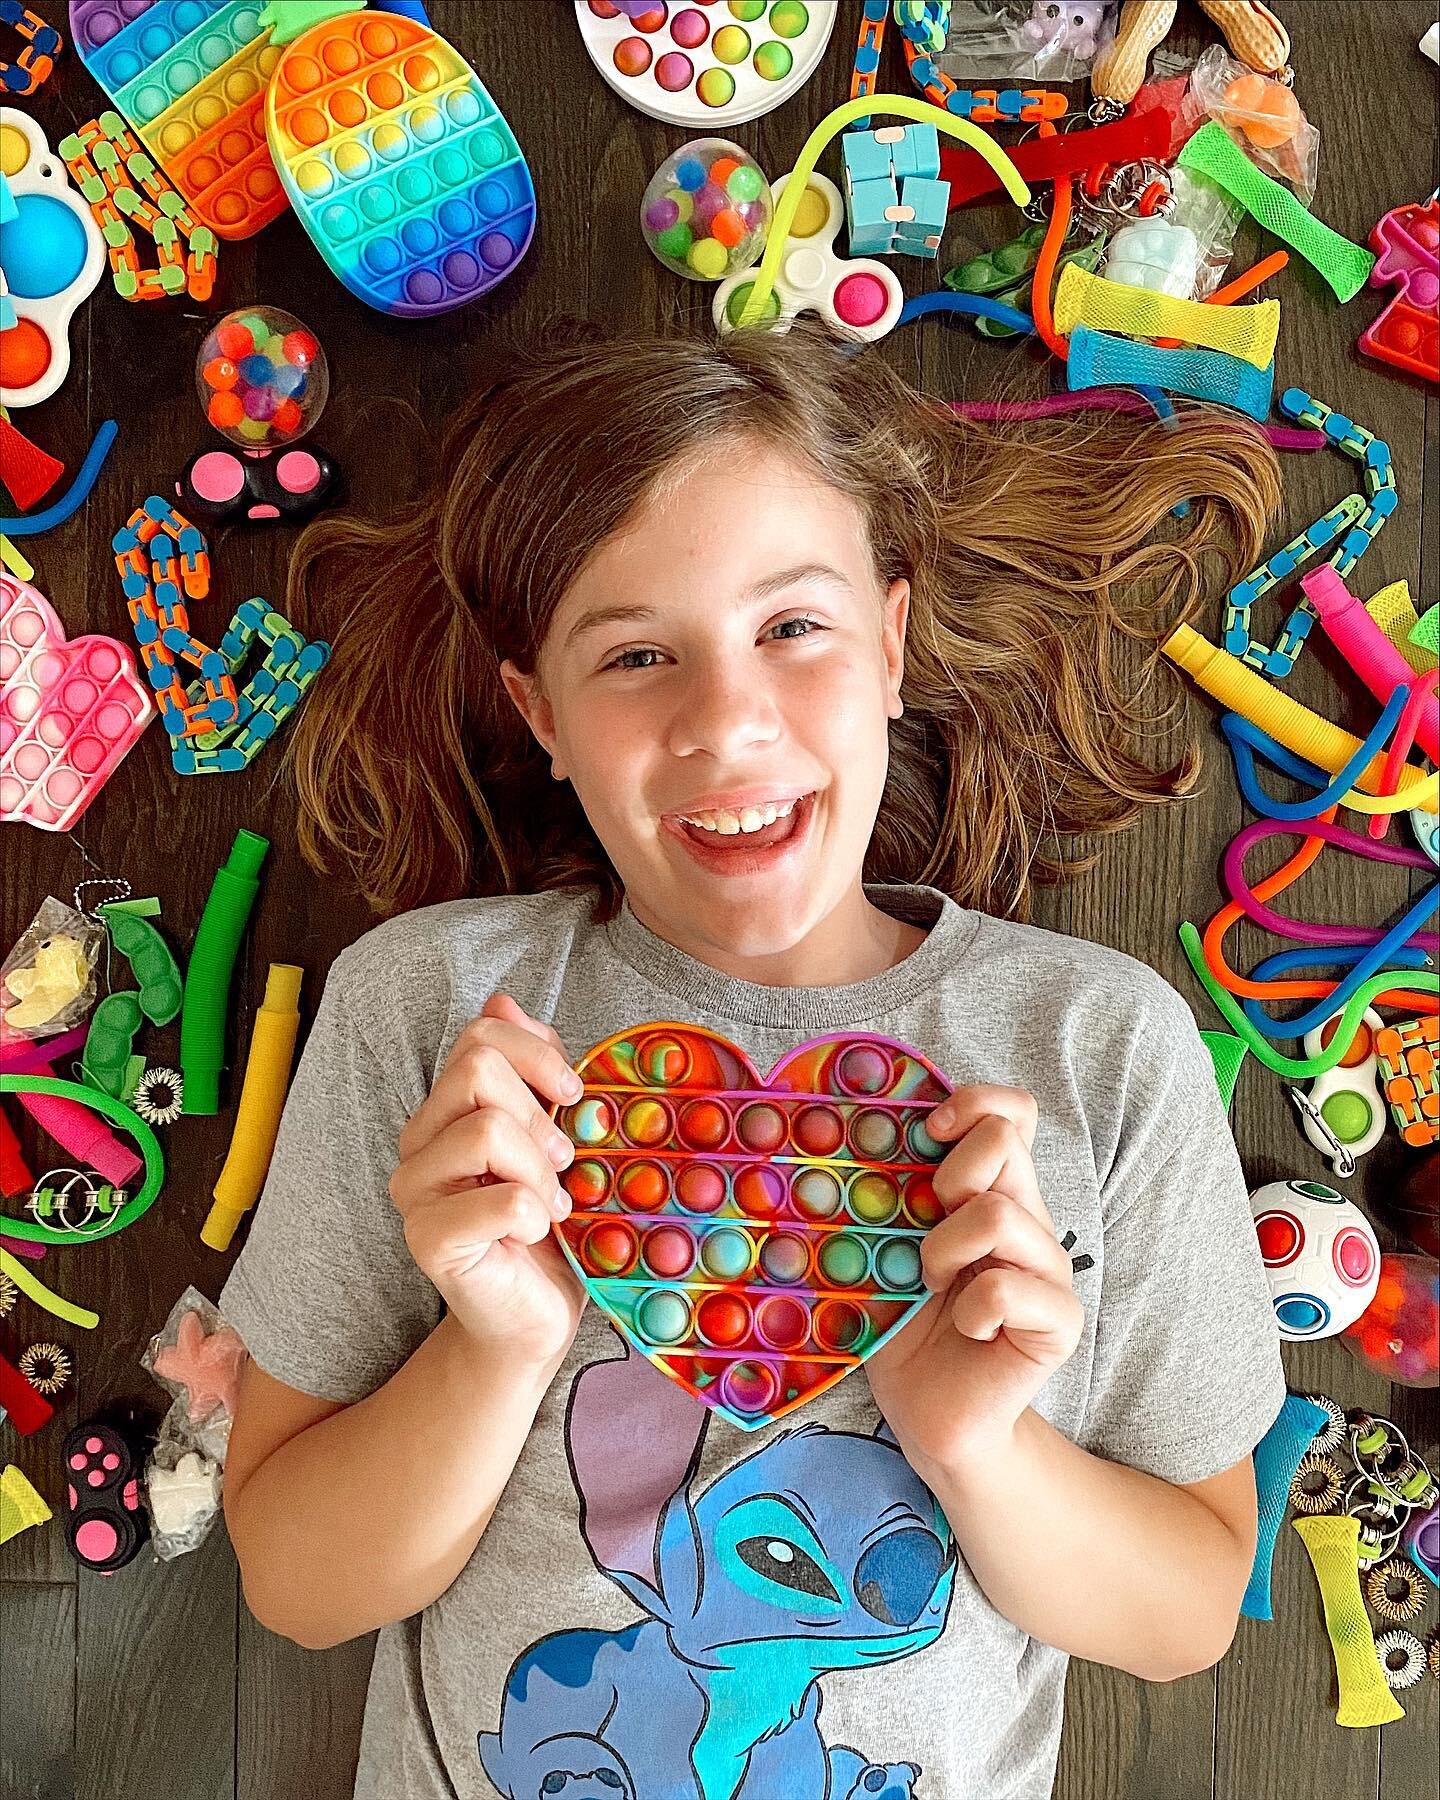 Happy 11th birthday Taylor 🎉

I took this fidget pictures of her and remembered I had a similar photo from when she busted open her pi&ntilde;ata on her 4th birthday 🥰🤯

A wonderful person, so proud to call you my daughter ❤️

#happybirthday #fidg